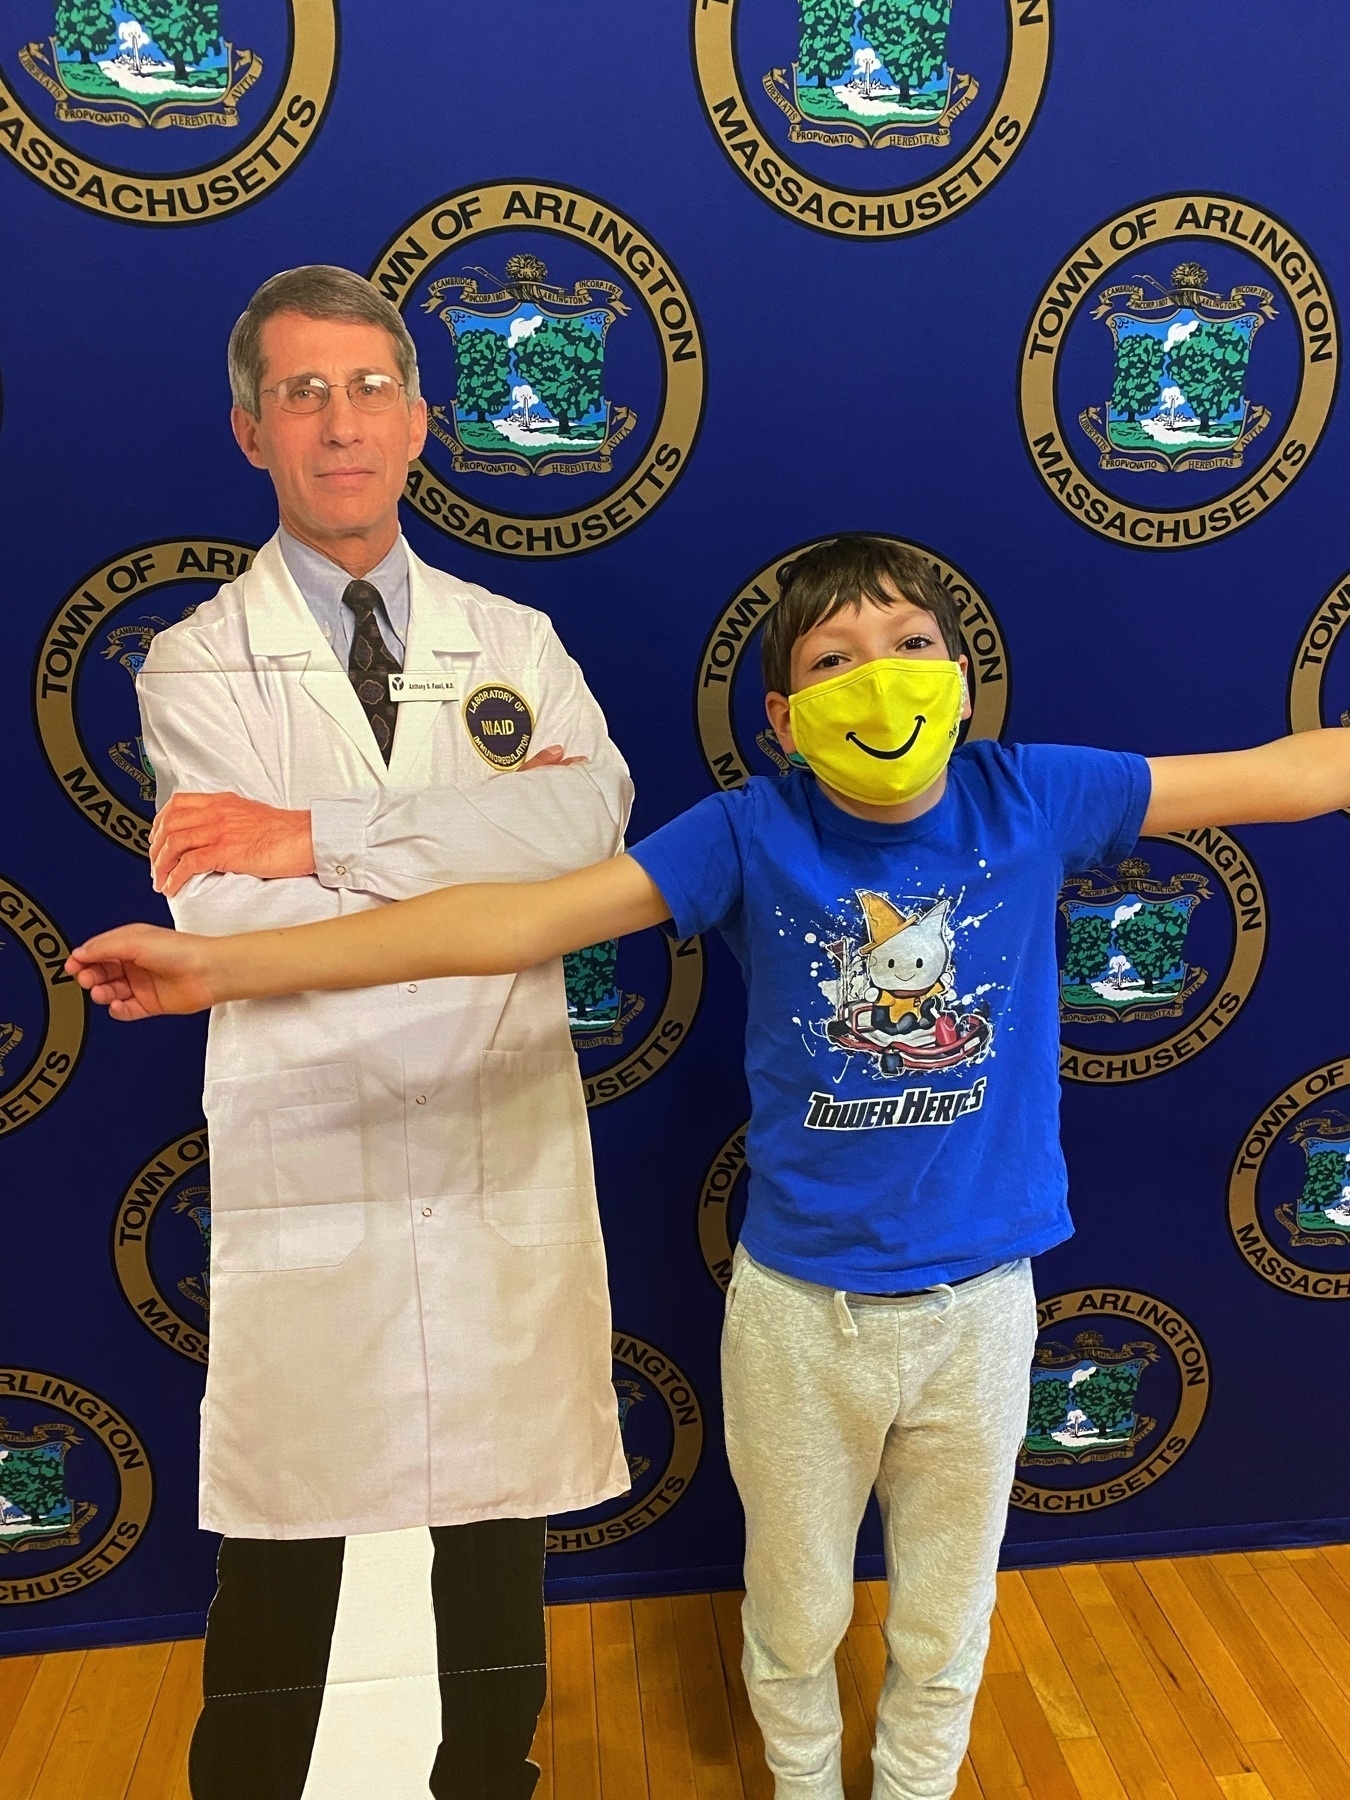 Cardboard cutout of Anthony Fauci alongside a 9yo boy with a happy face mask, arms reaching out.